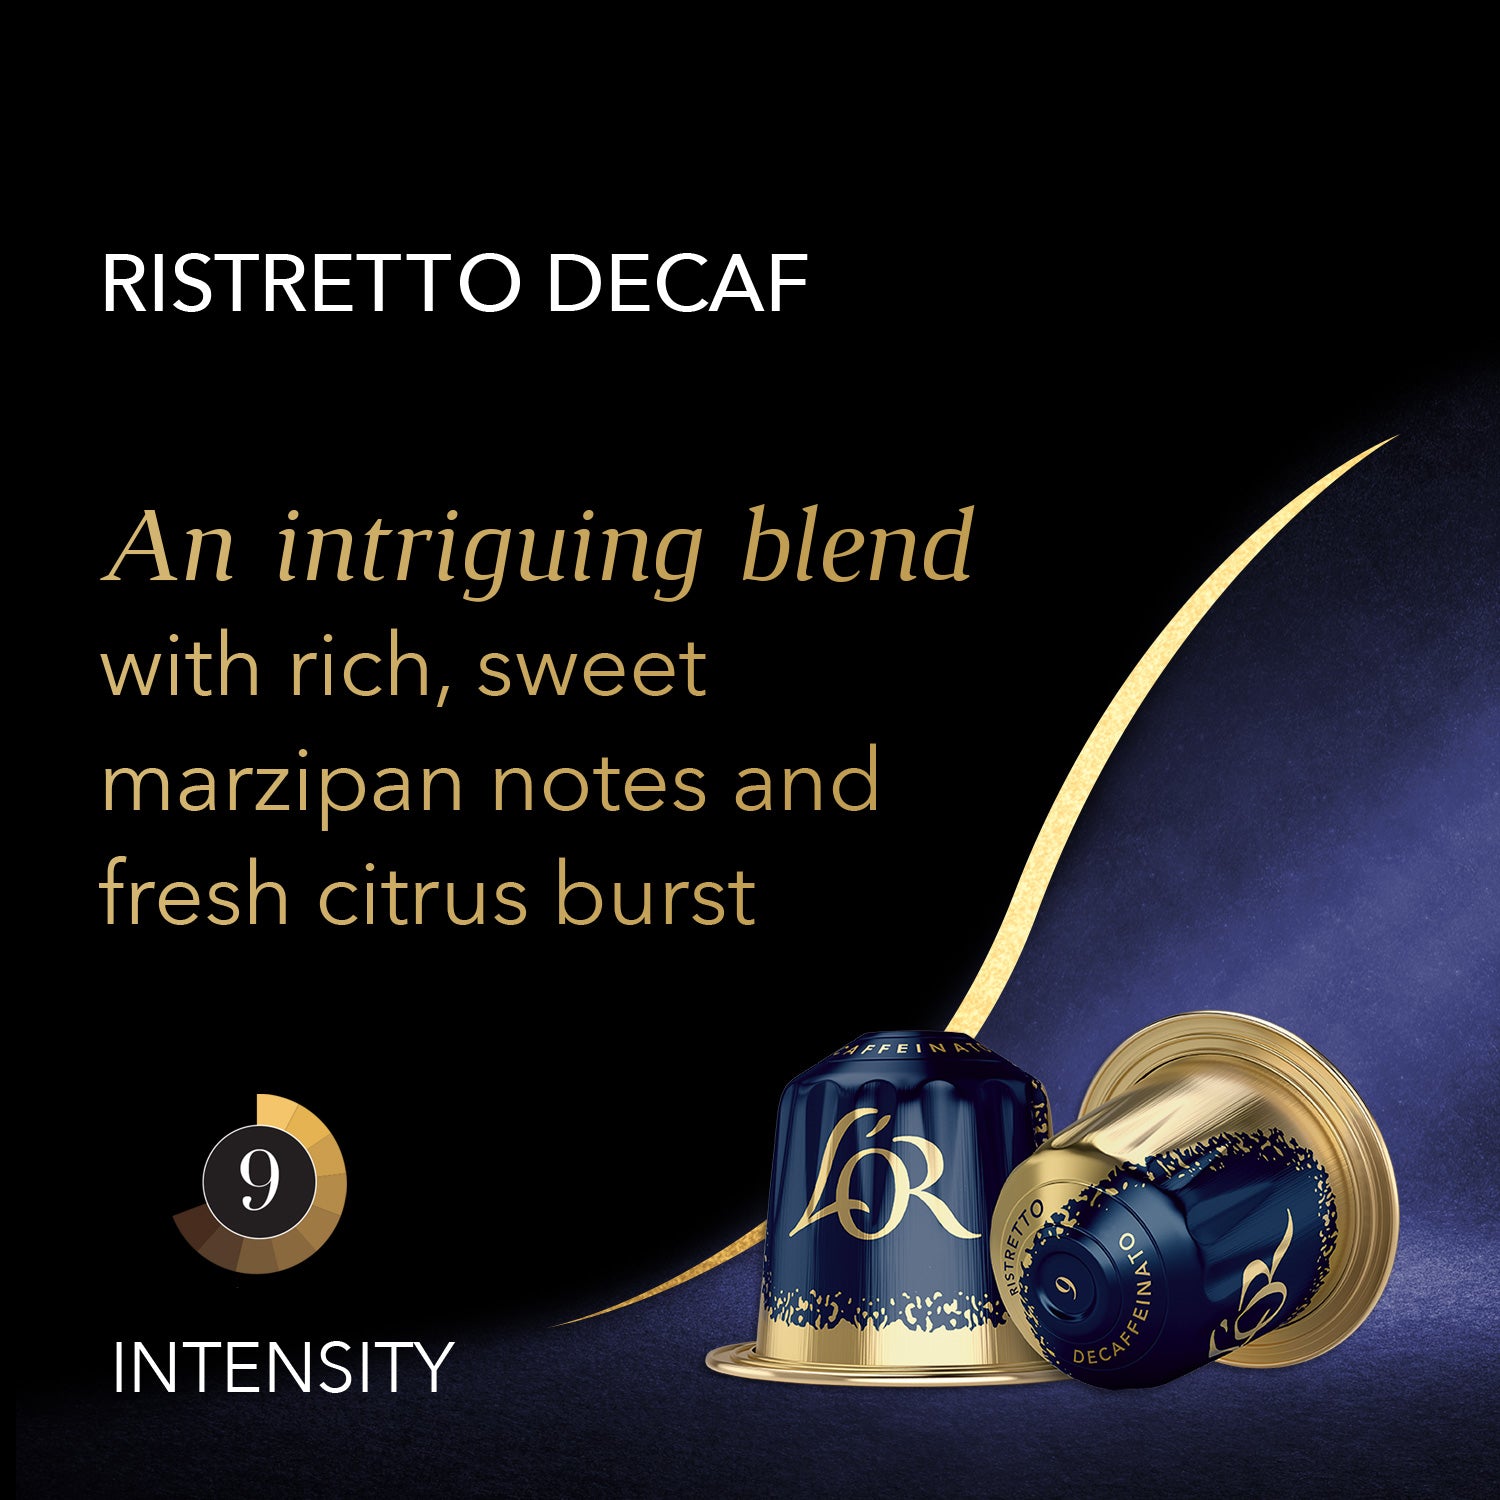 An intriguing blend with rich, sweet marzipan notes and fresh fruit burst.